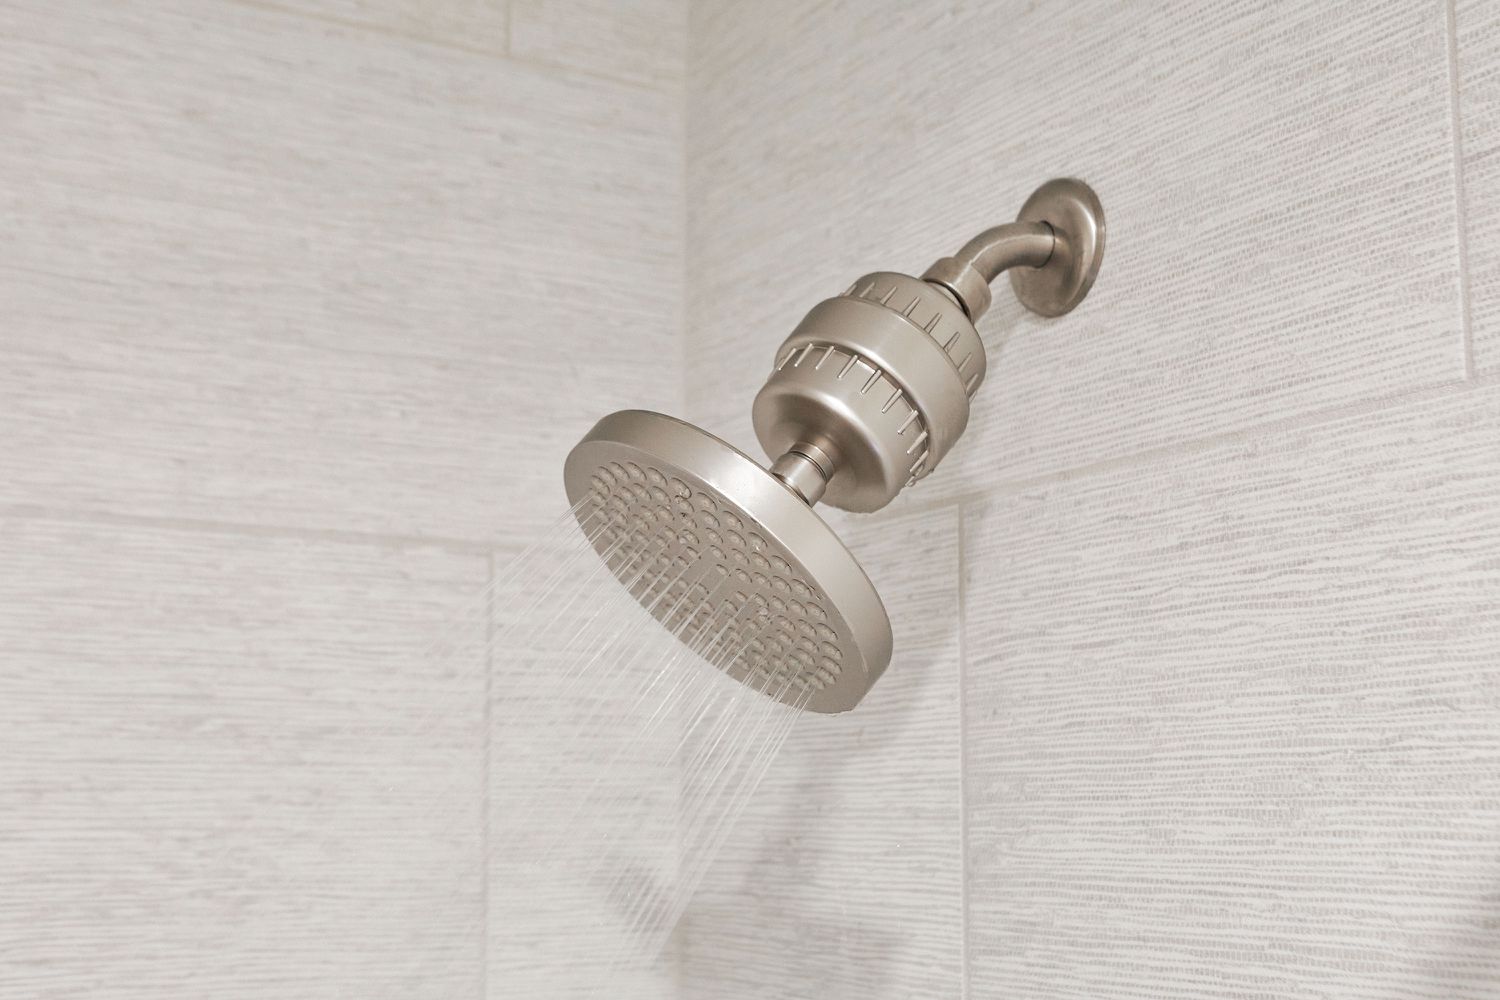 Running shower head with filter attached on neck arm